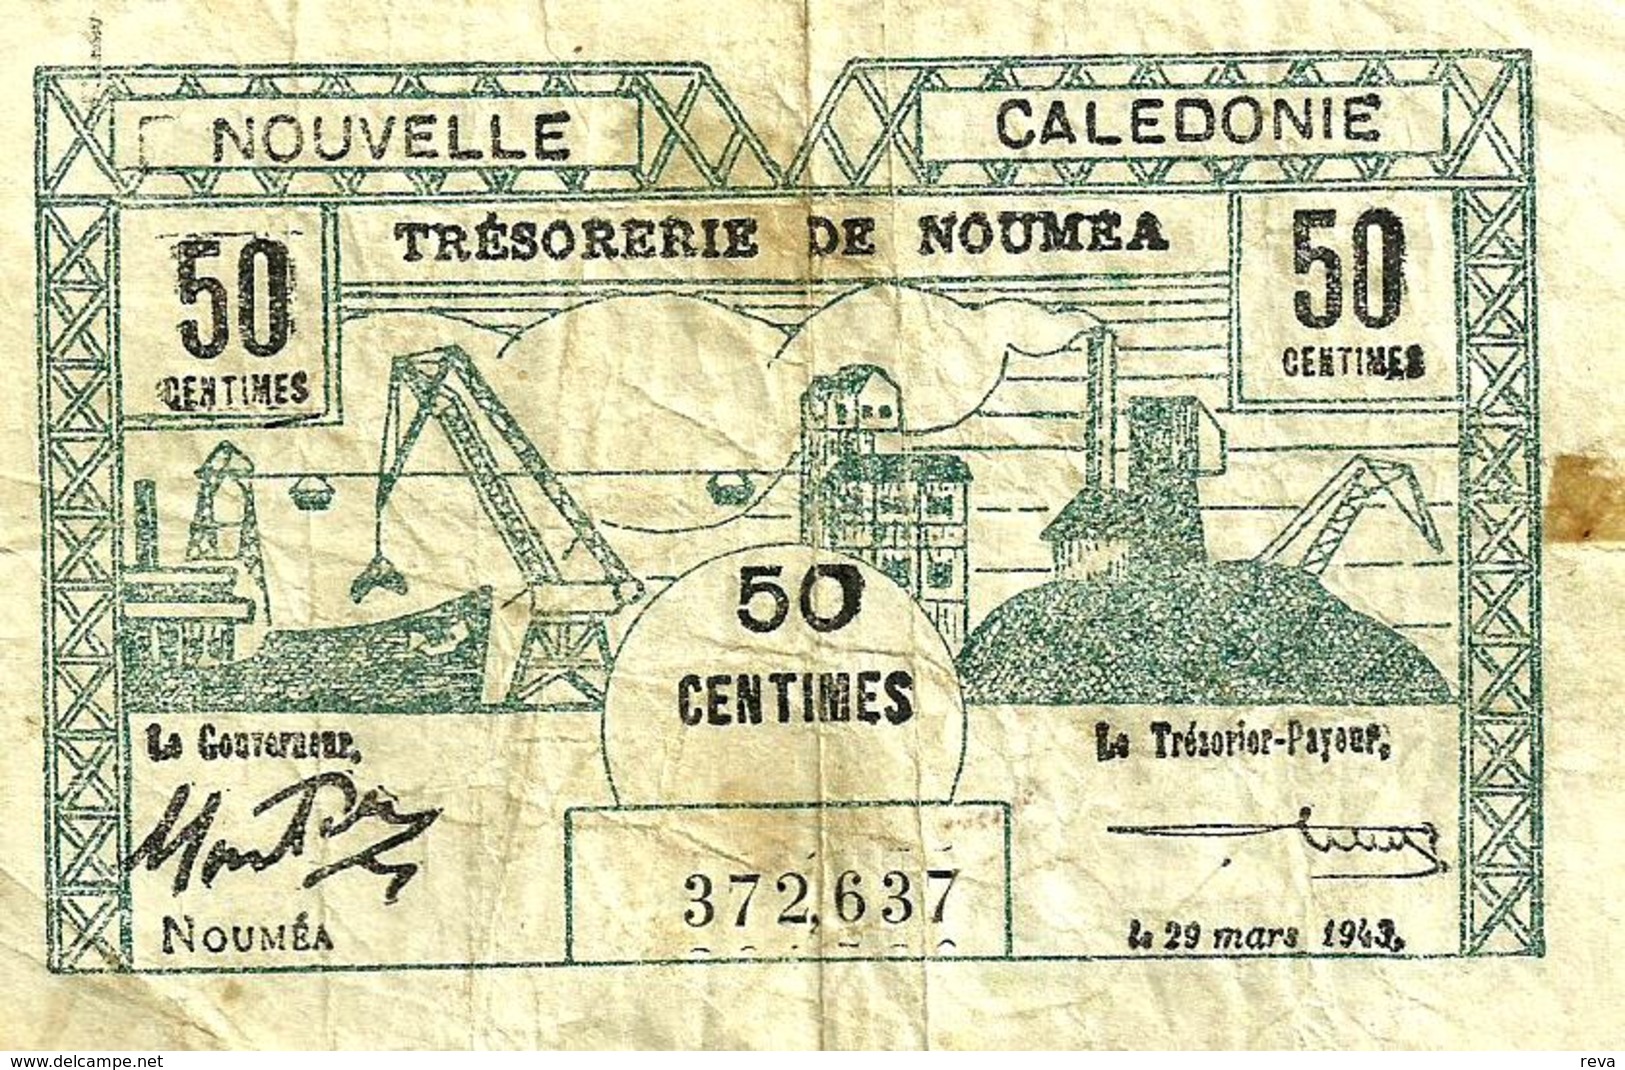 NEW CALEDONIA 50 CENTIMES MINE FRONT ANIMAL HEAD BACK WWII EMERGENCY ISSUE DATED 29-03-1943 P54 AVF READ DESCRIPTION!! - Nouméa (Nuova Caledonia 1873-1985)